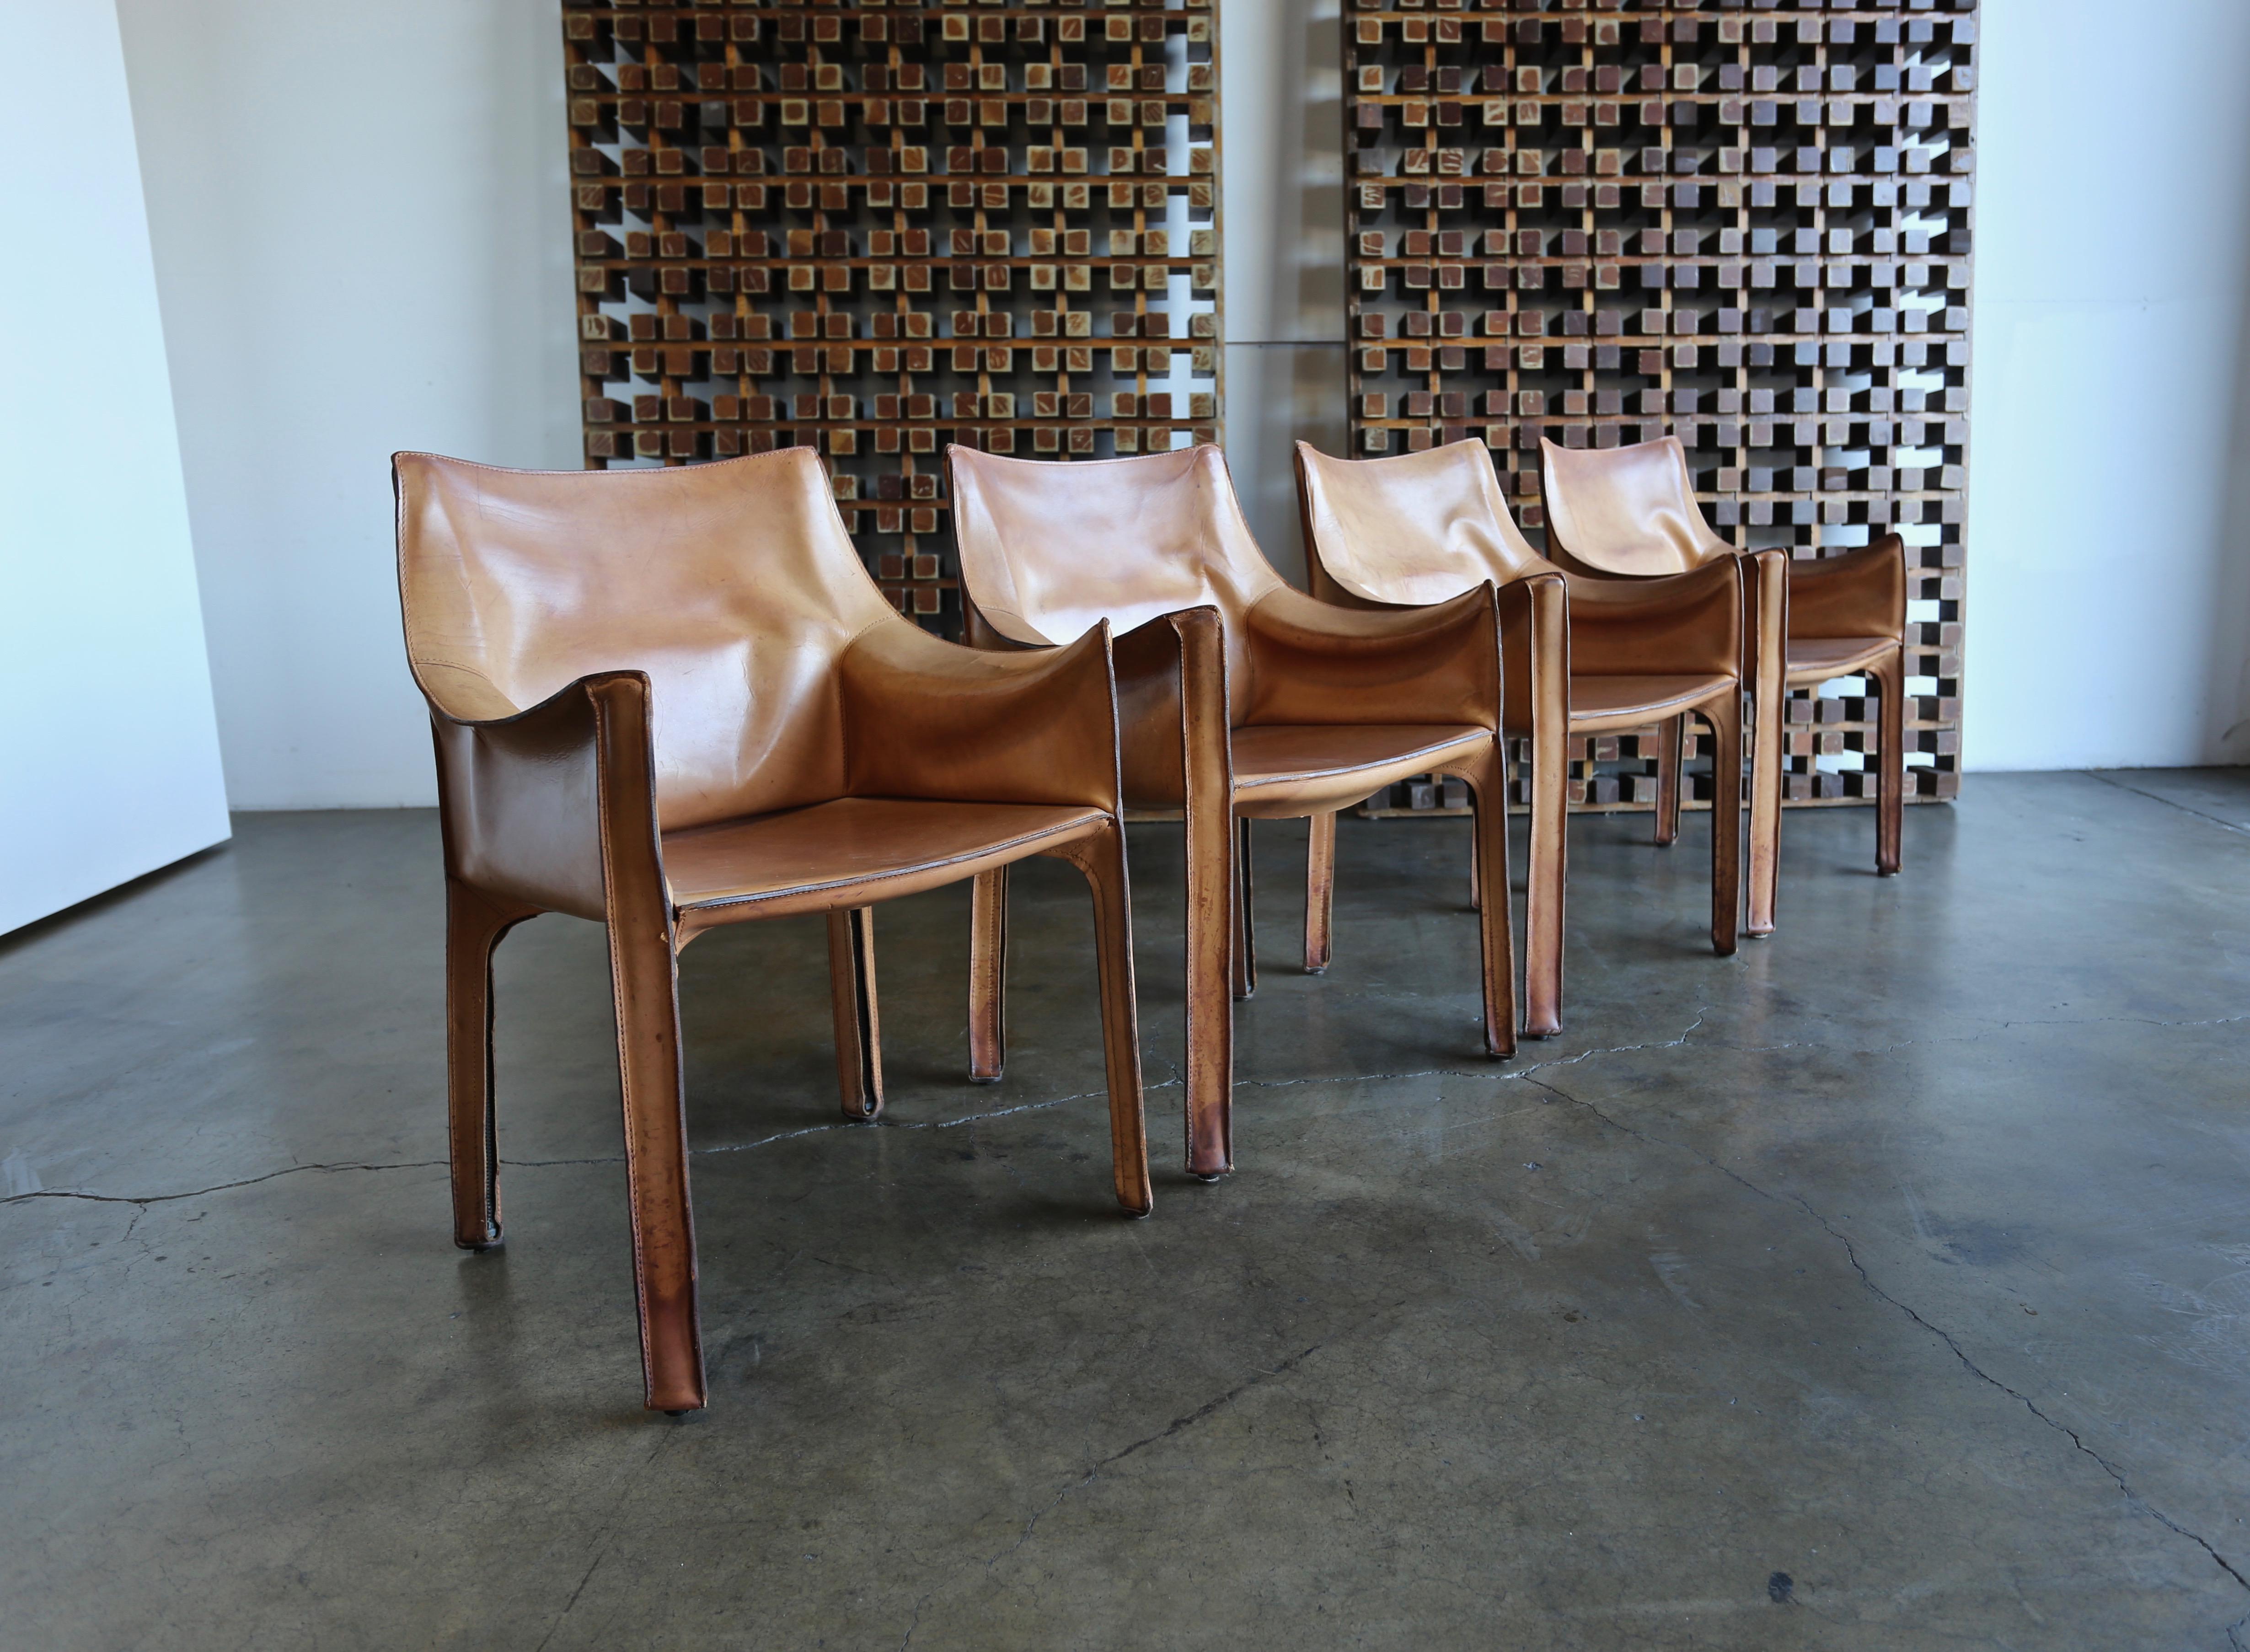 Set of four leather Cab armchairs by Mario Bellini for Cassina, circa 1980. This set has a beautiful original patina.